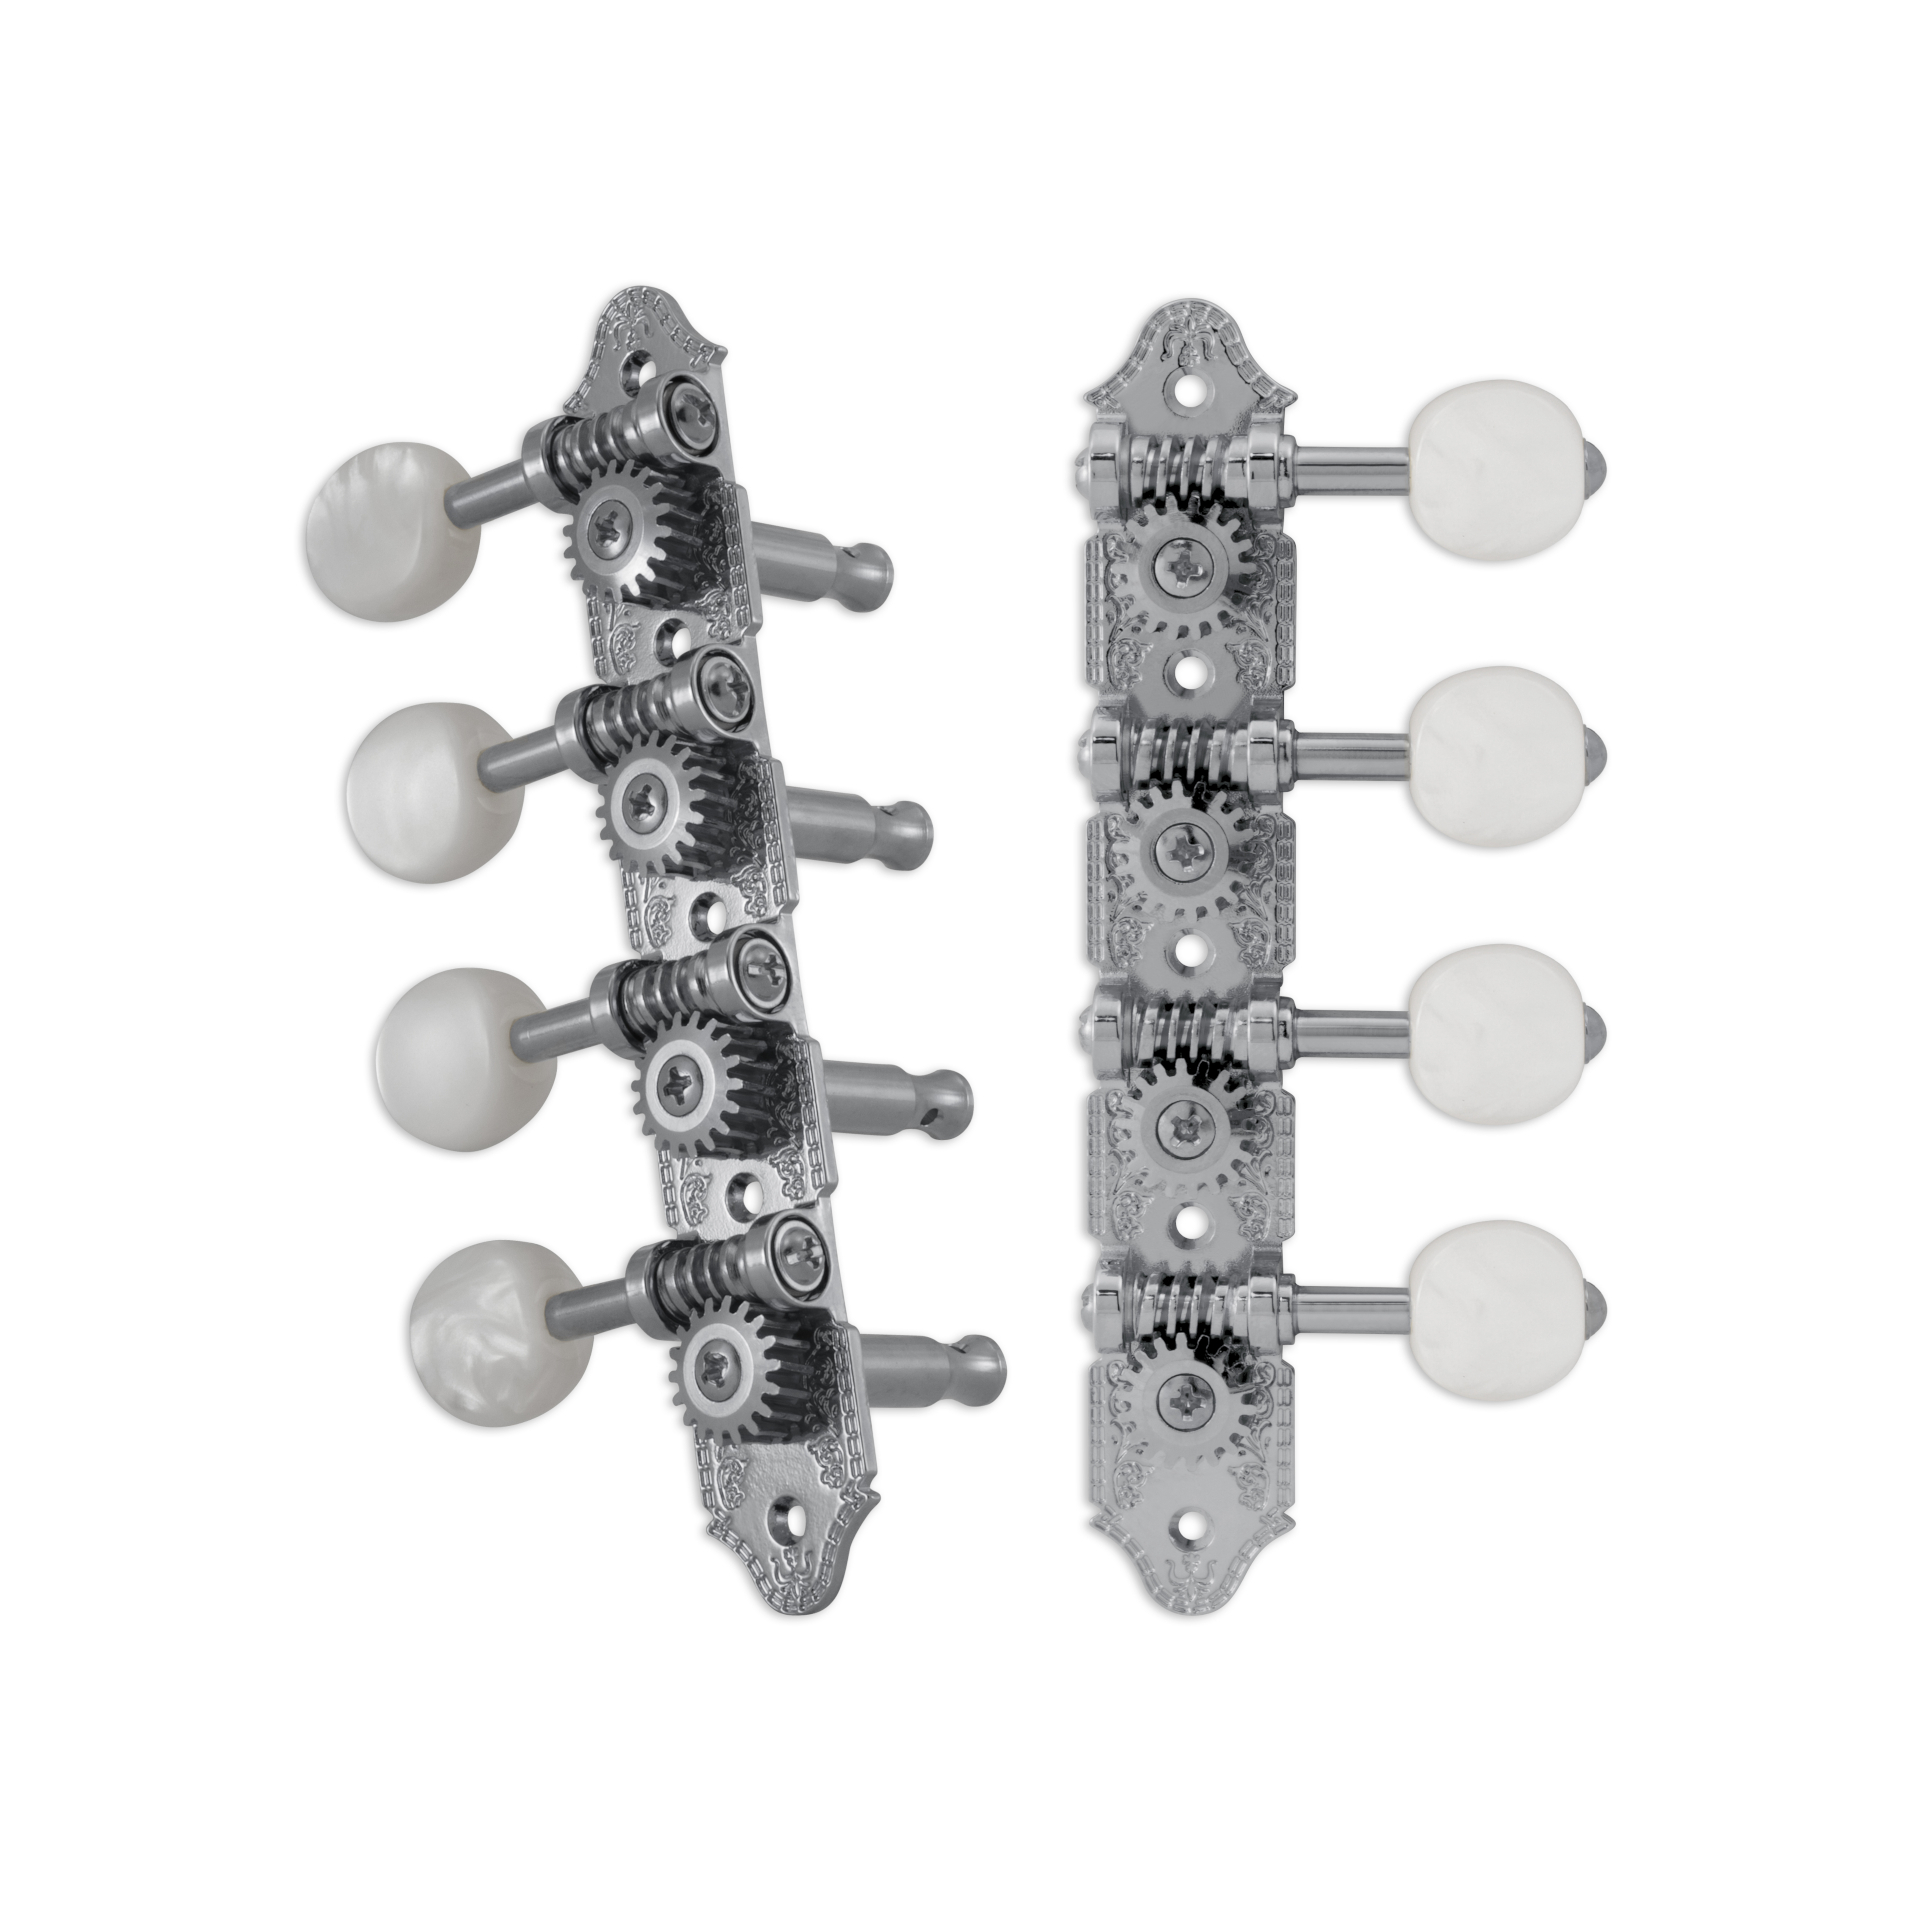 Grover 409C Professional Mandolin Machines with Pearloid Button - Mandolin Machine Heads, Standard 4 + 4, for "A"-Style Mandolins - Chrome